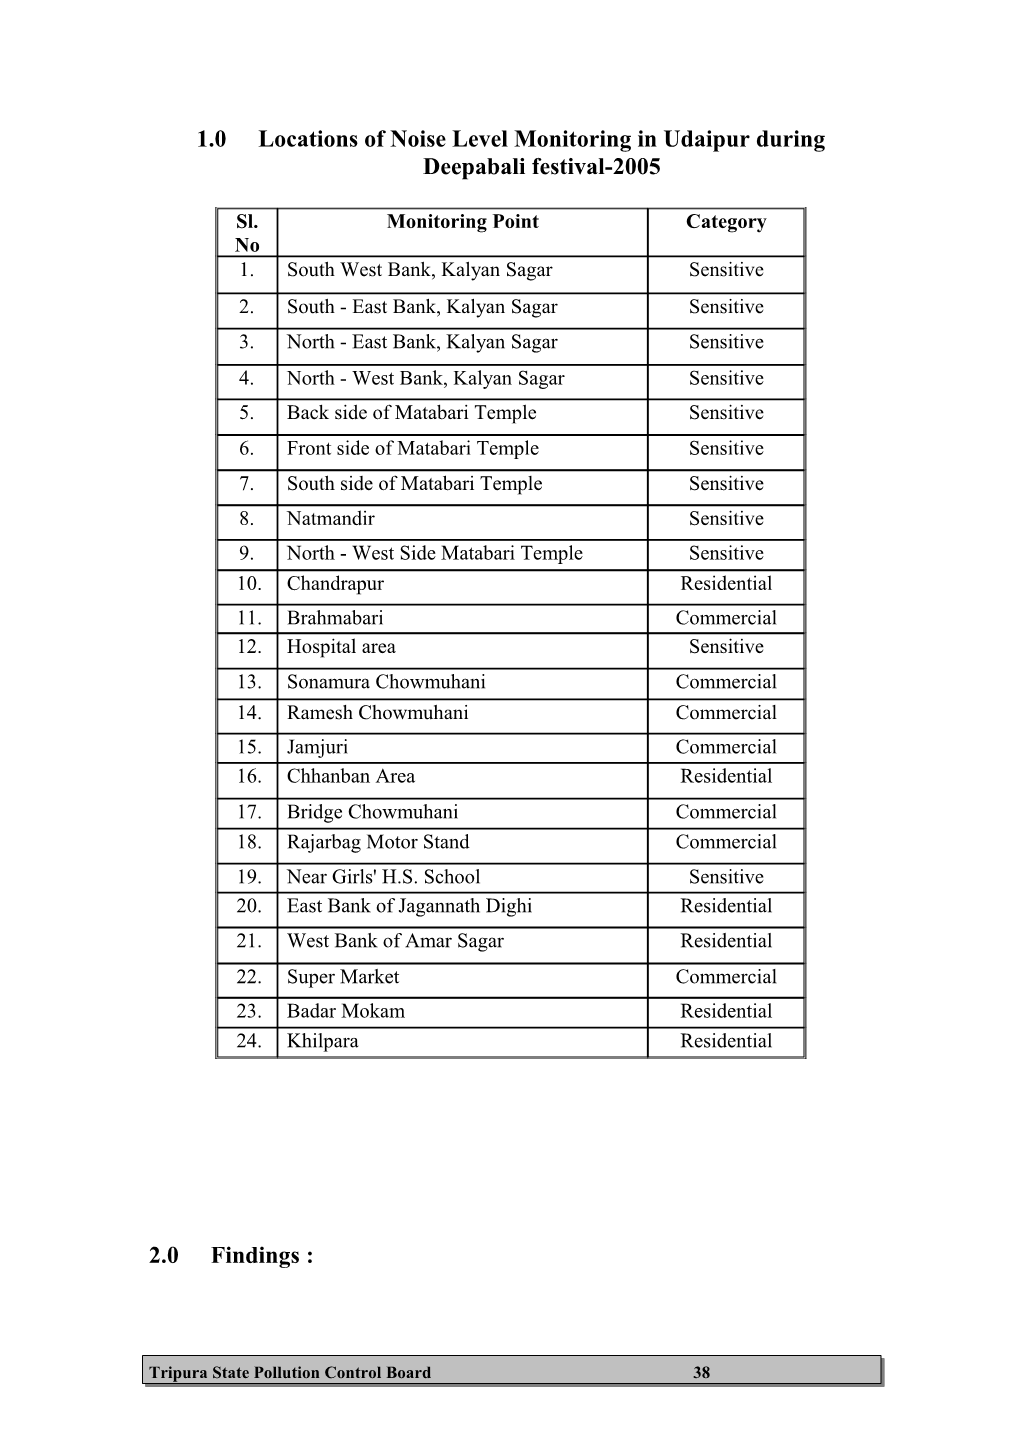 1.0 Locations of Noise Level Monitoring in Udaipur During Deepabali Festival-2005